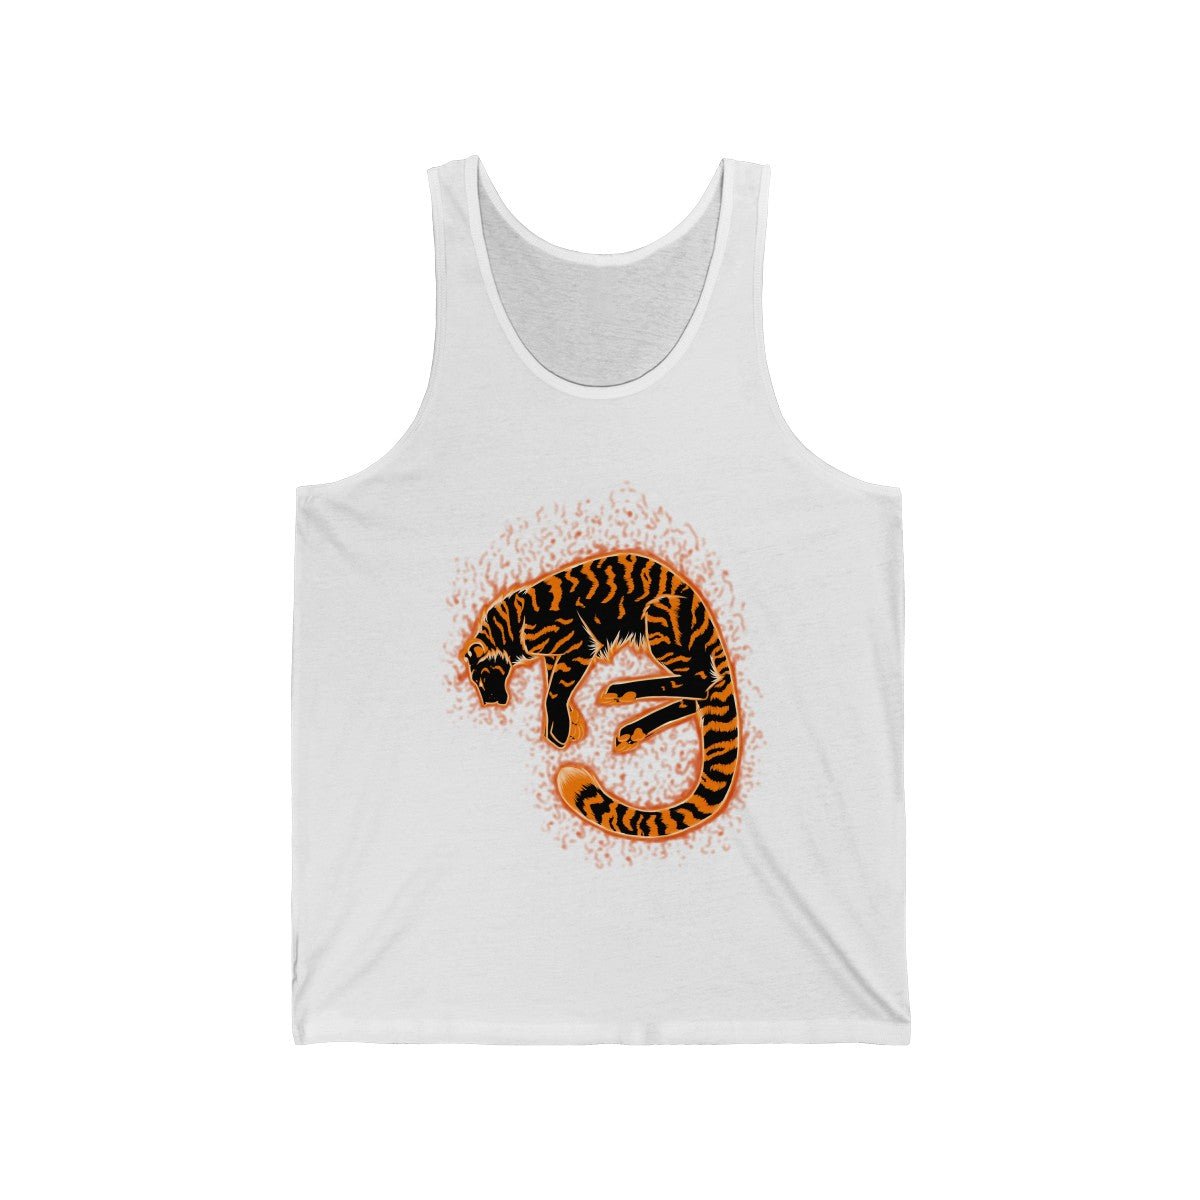 Tiger - Tank Top Tank Top Dire Creatures White XS 